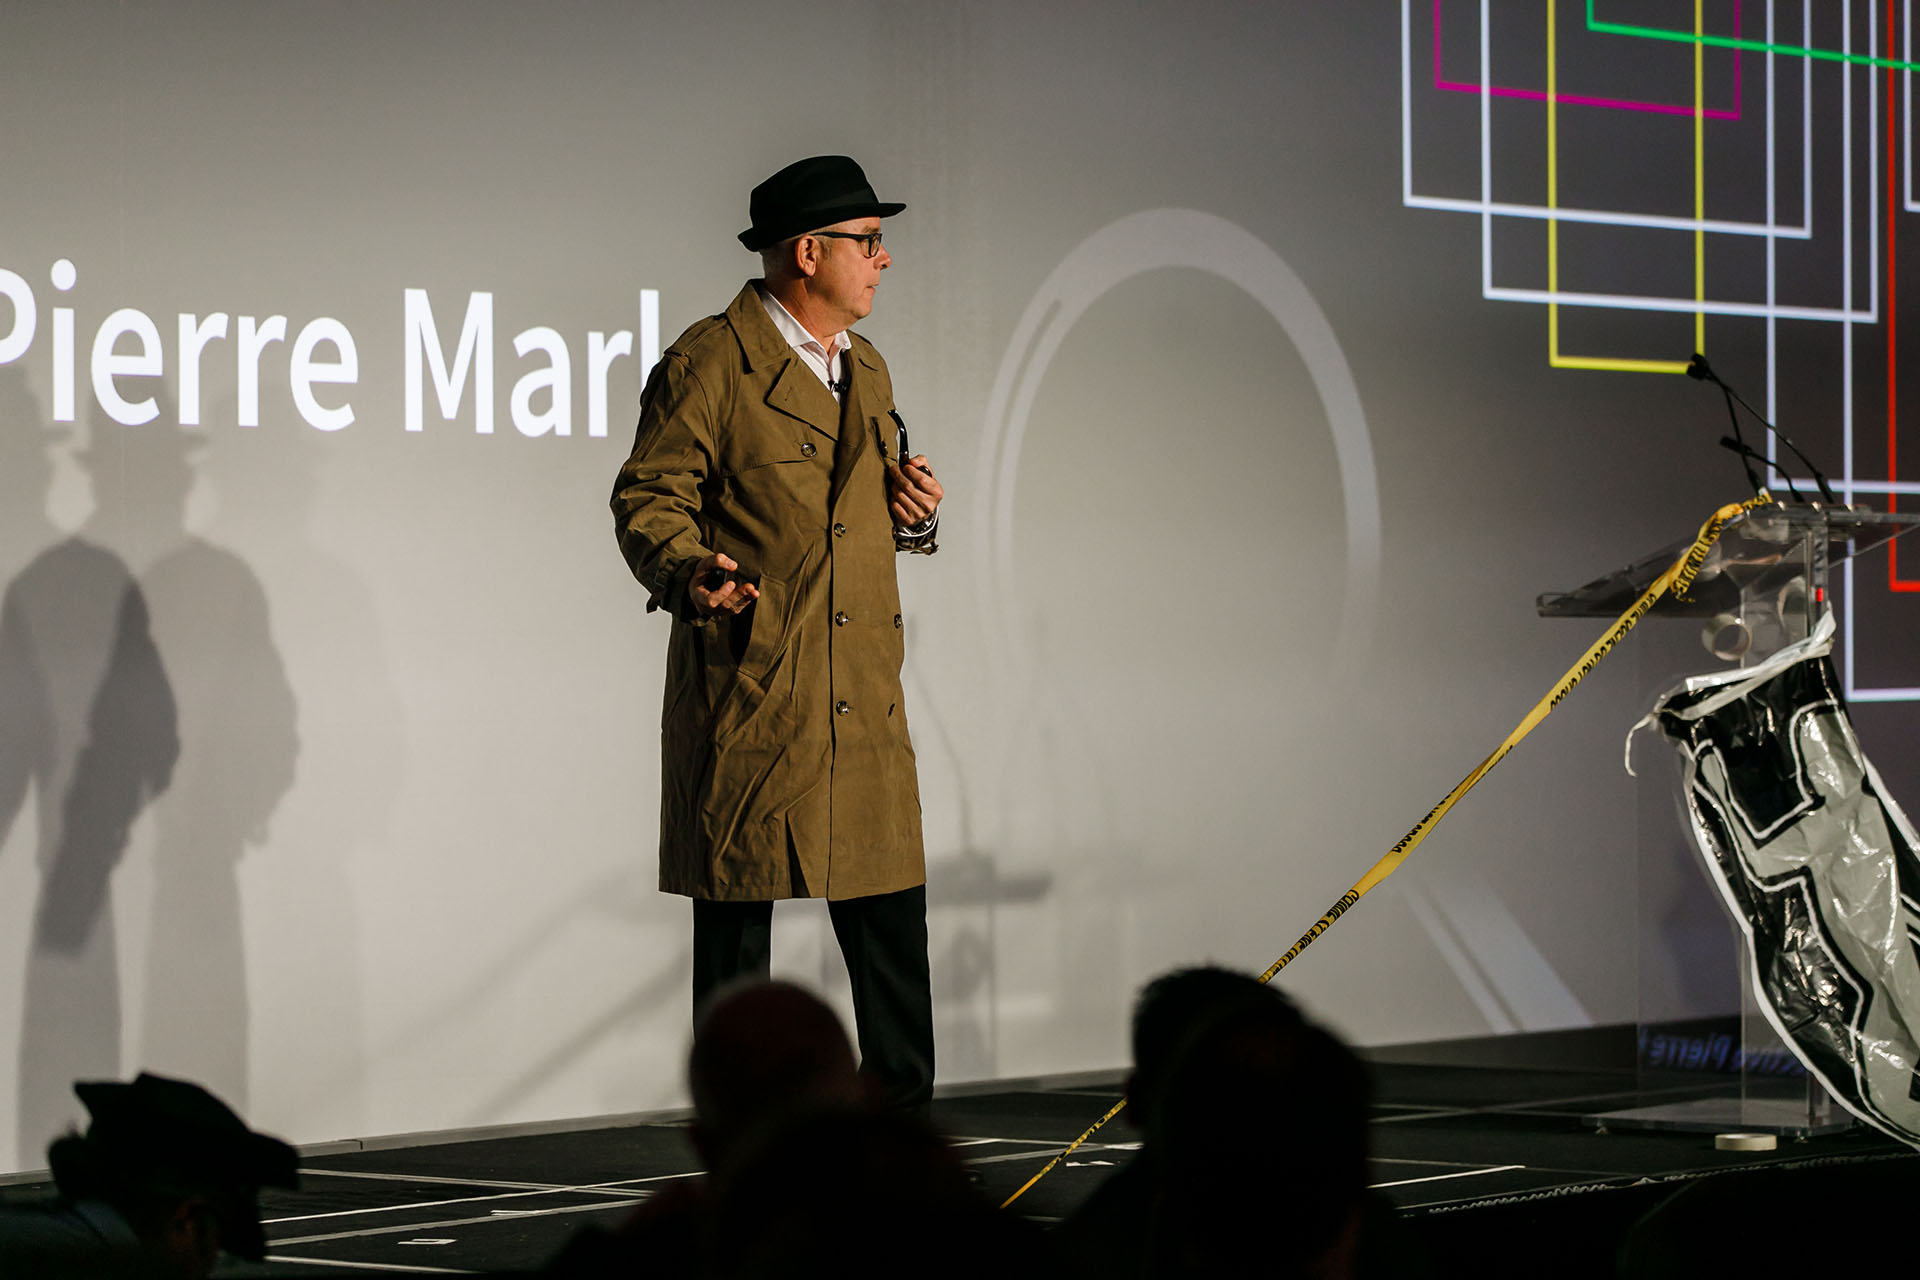 A man in a long trench coat and hat standing on a stage in front of a crowd